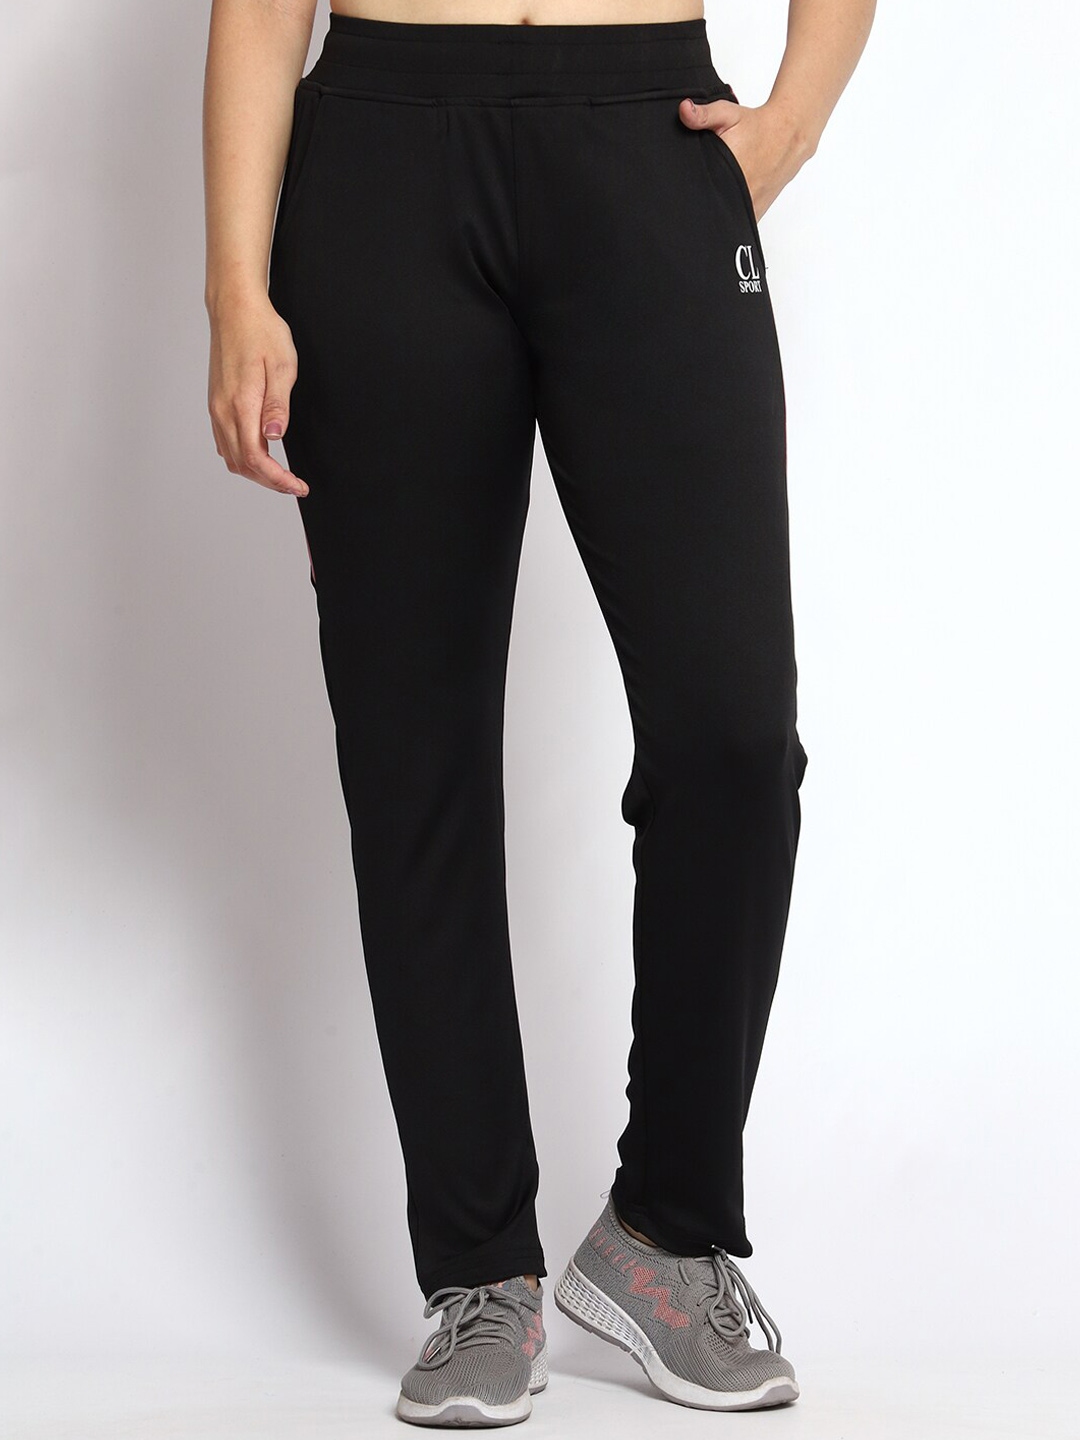 Buy CL SPORT Women Mid Rise Slim Fit Rapid Dry Track Pants - Track ...